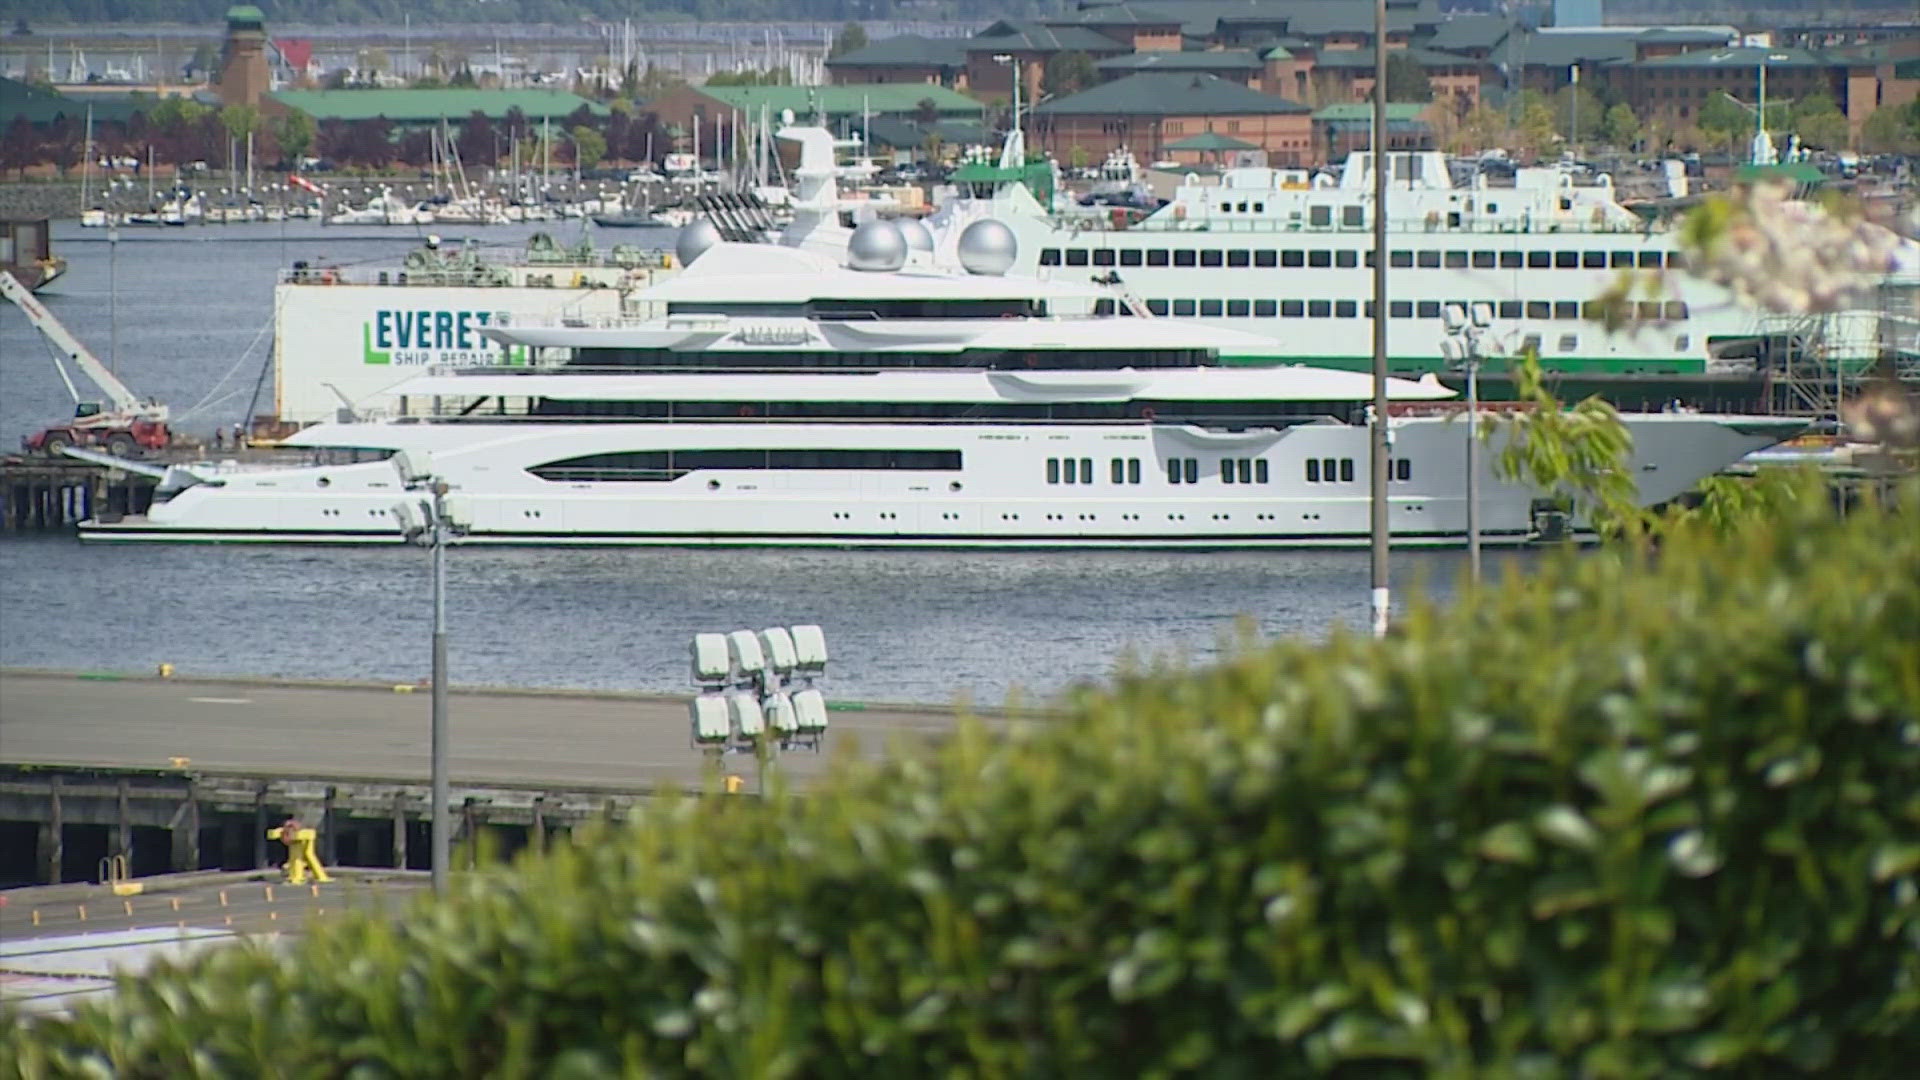 The $325 million vessel was recently seized by the U.S. government. Now, it's sitting in the Port of Everett and causing international intrigue.